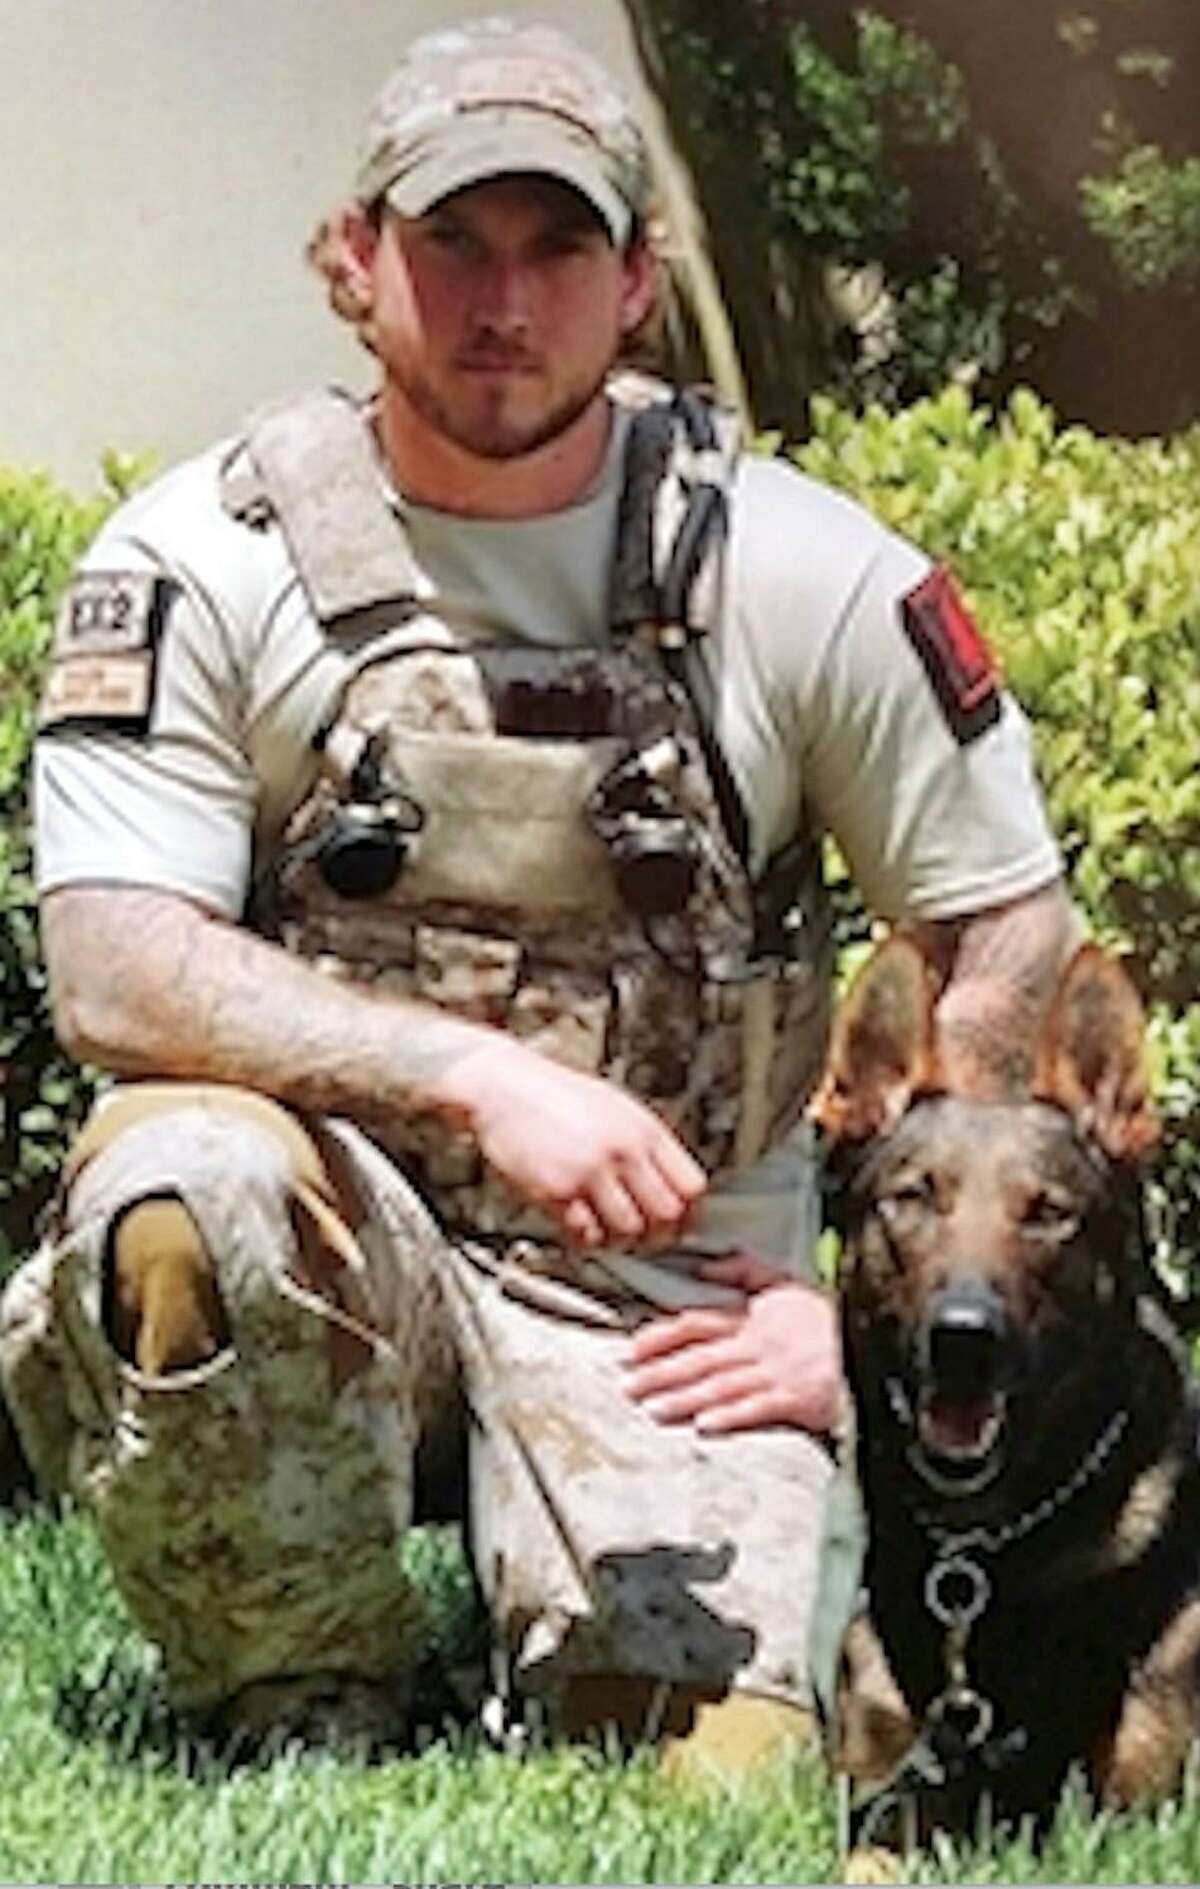 Will Chesney, the K9 handler for the special task force that killed Osama bin Laden, is in the area promoting his new book, “No Ordinary Dog: My Partner from the SEAL Teams to the Bin Laden Raid”, which comes out April 21. The story is about Cairo, who served with Chesney through his military career.